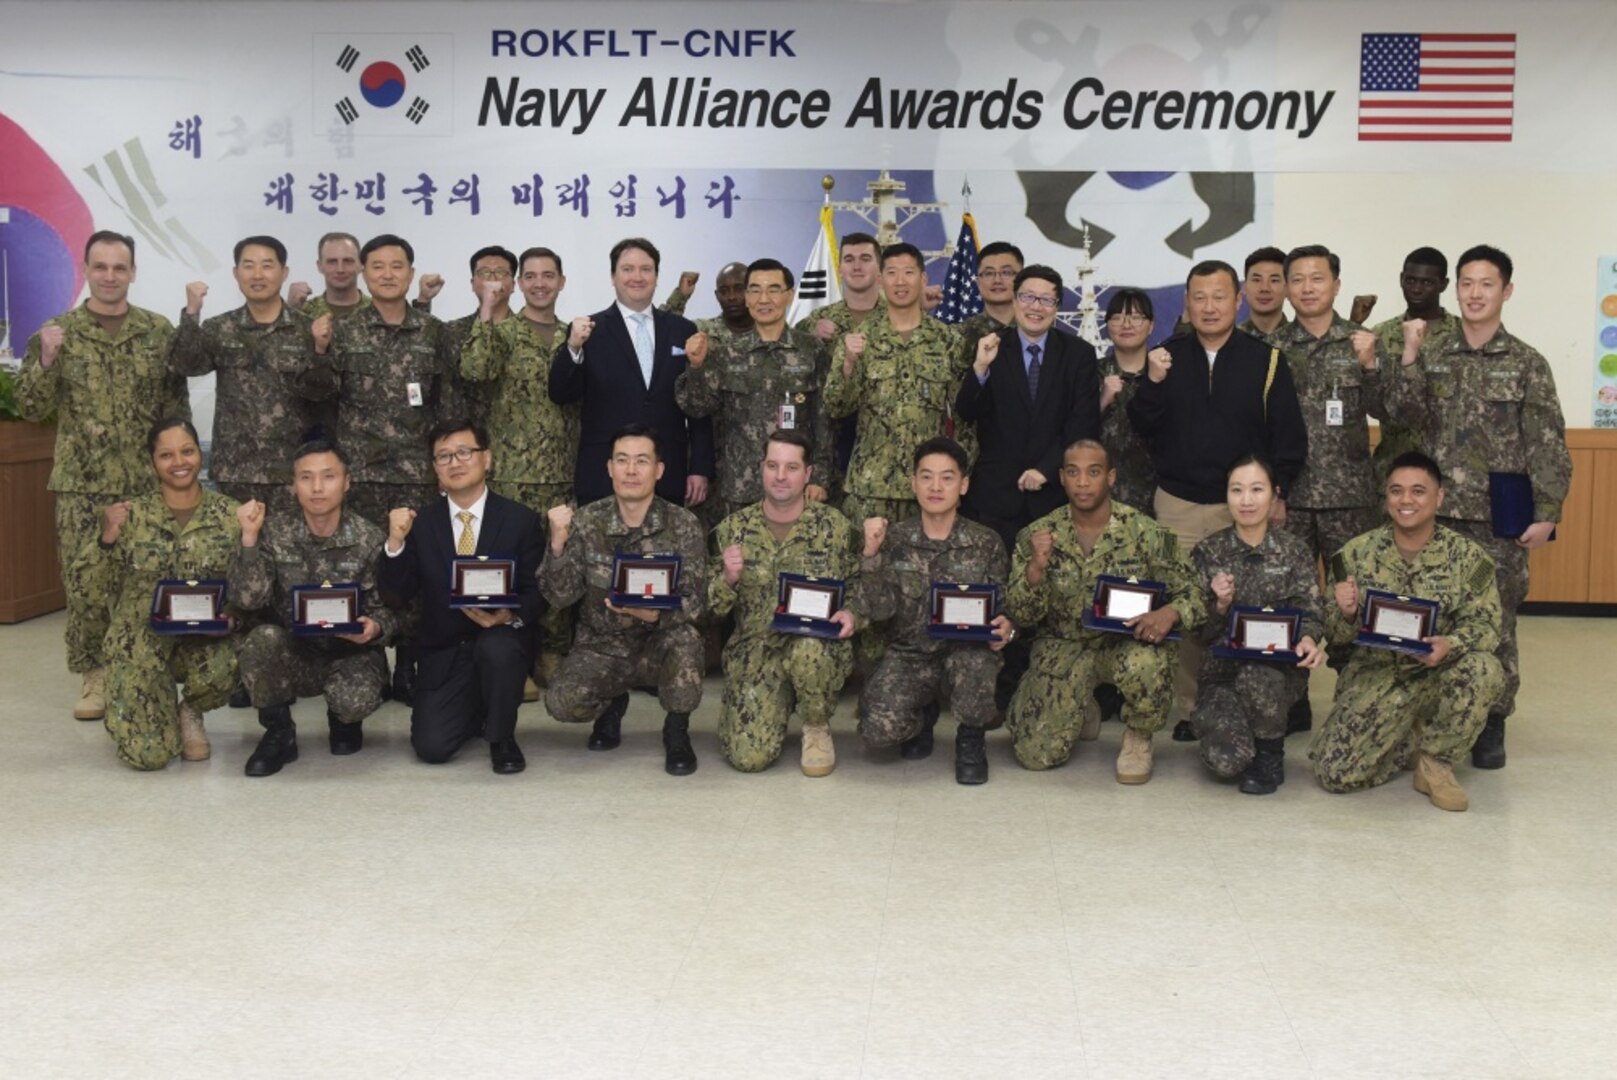 Vice Adm. Jung, Jin-Sup, the commander of Republic of Korea Fleet (CRF), Rear Adm. Brad Cooper, the commander of U.S. Naval Forces Korea (CNFK), and Marc Knapper, Chargé d’Affaires for the U.S. embassy in Seoul, stand with awardees from both navies during the second official CRF and CNFK Navy alliance awards ceremony, Feb. 16, 2017. The ceremony is in honor of CNFK's one-year anniversary since the command move to Busan. CNFK is the U.S. Navy's representative in the ROK, providing leadership and expertise in naval matters to improve institutional and operational effectiveness between the two navies and to strengthen collective security efforts in Korea and the region. 

